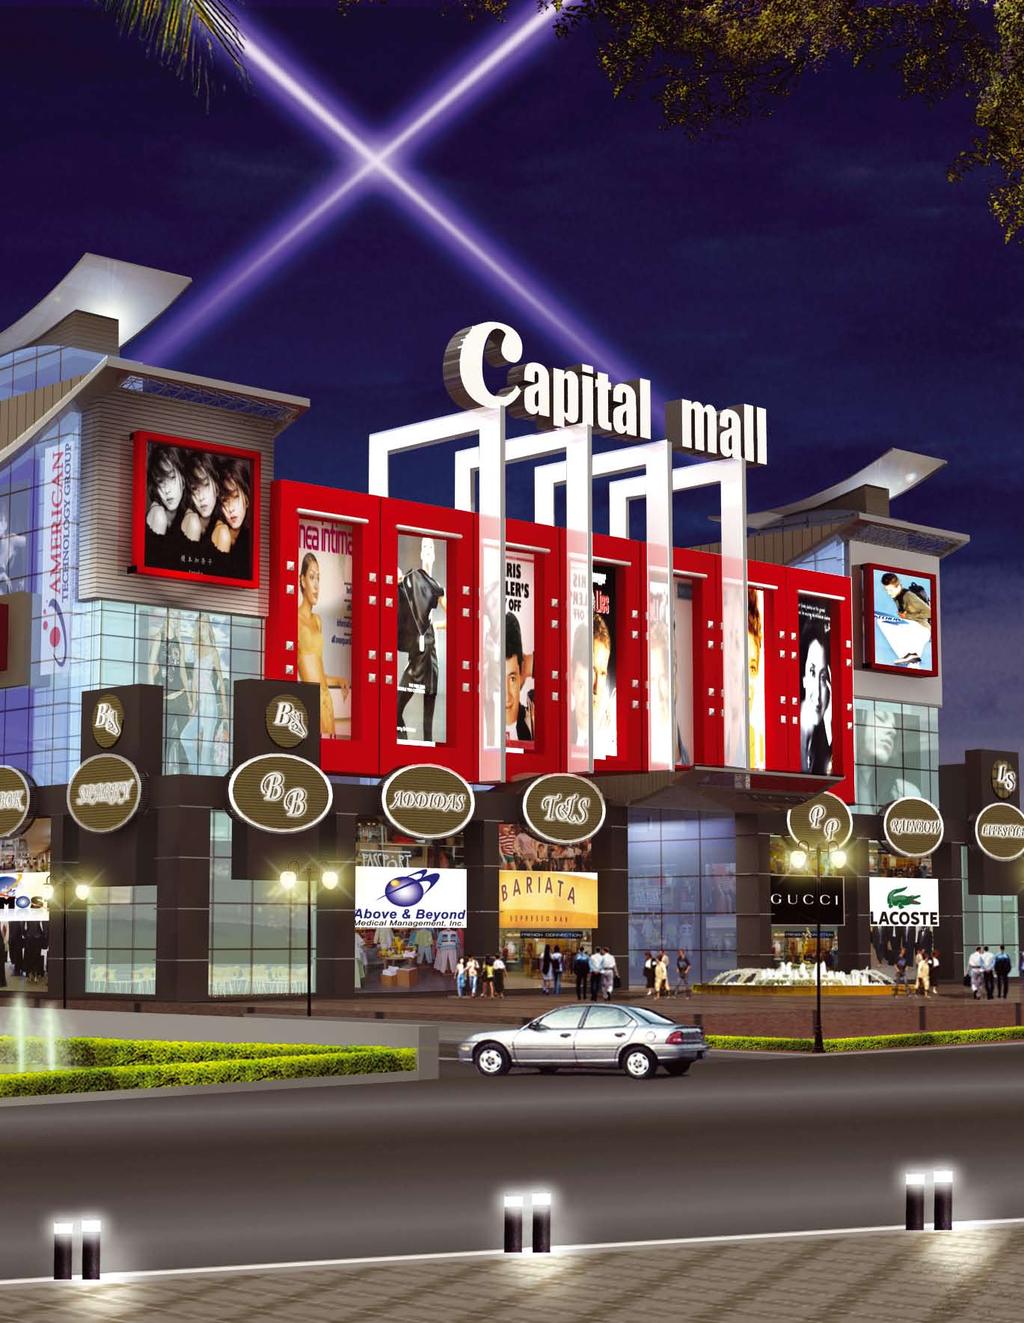 Capital Mall at Night The business opportunity Capital Mall houses a variety of formats to fit the needs and interests of your business, whether in the field of retail, commerce, recreation, leisure